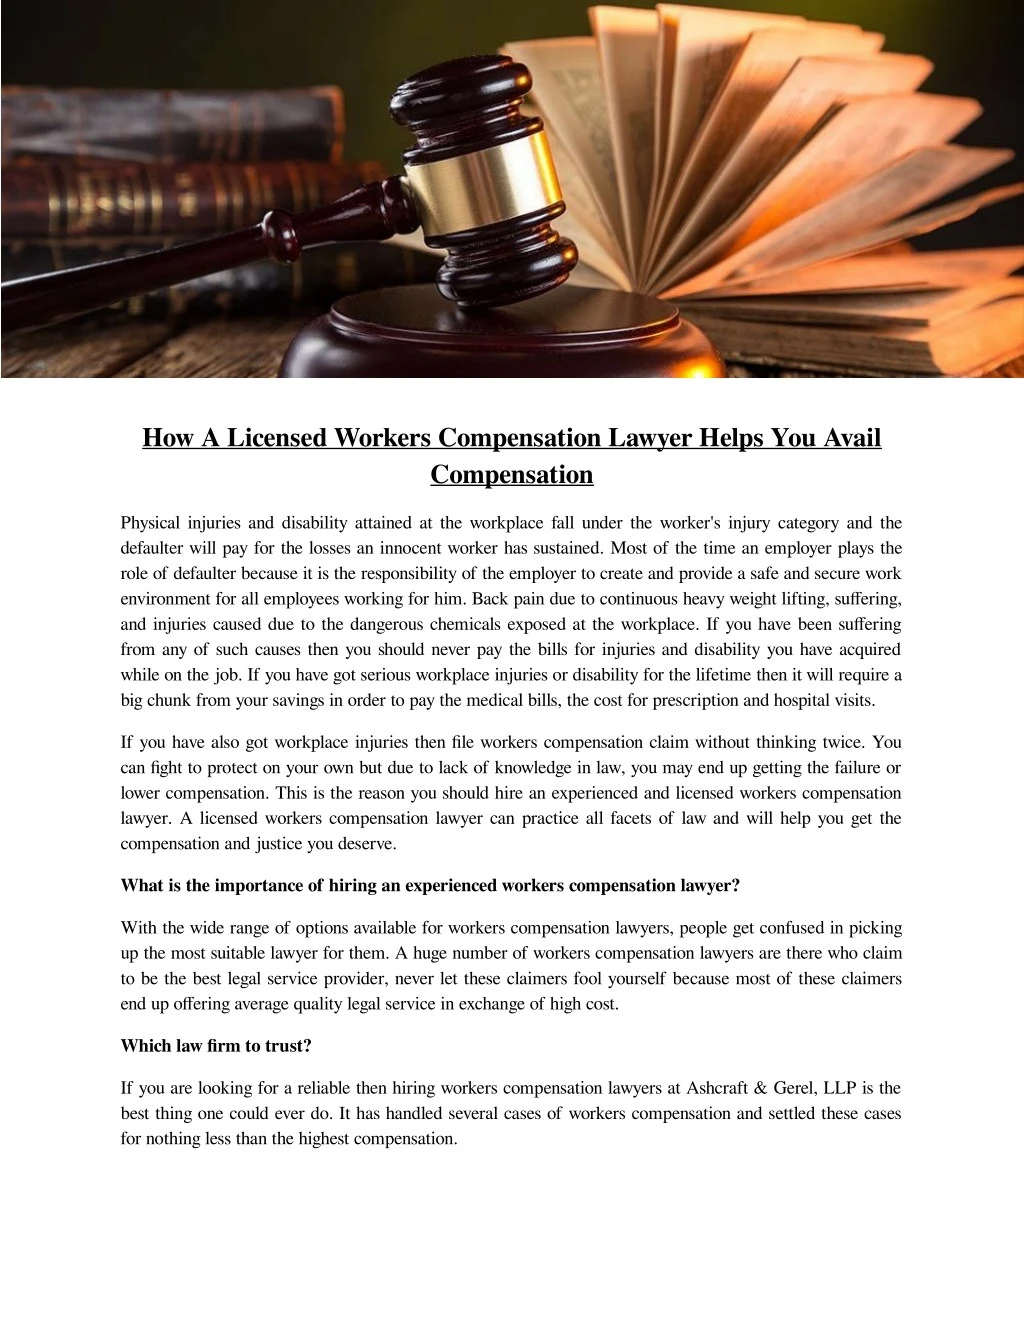 how a licensed workers compensation lawyer helps